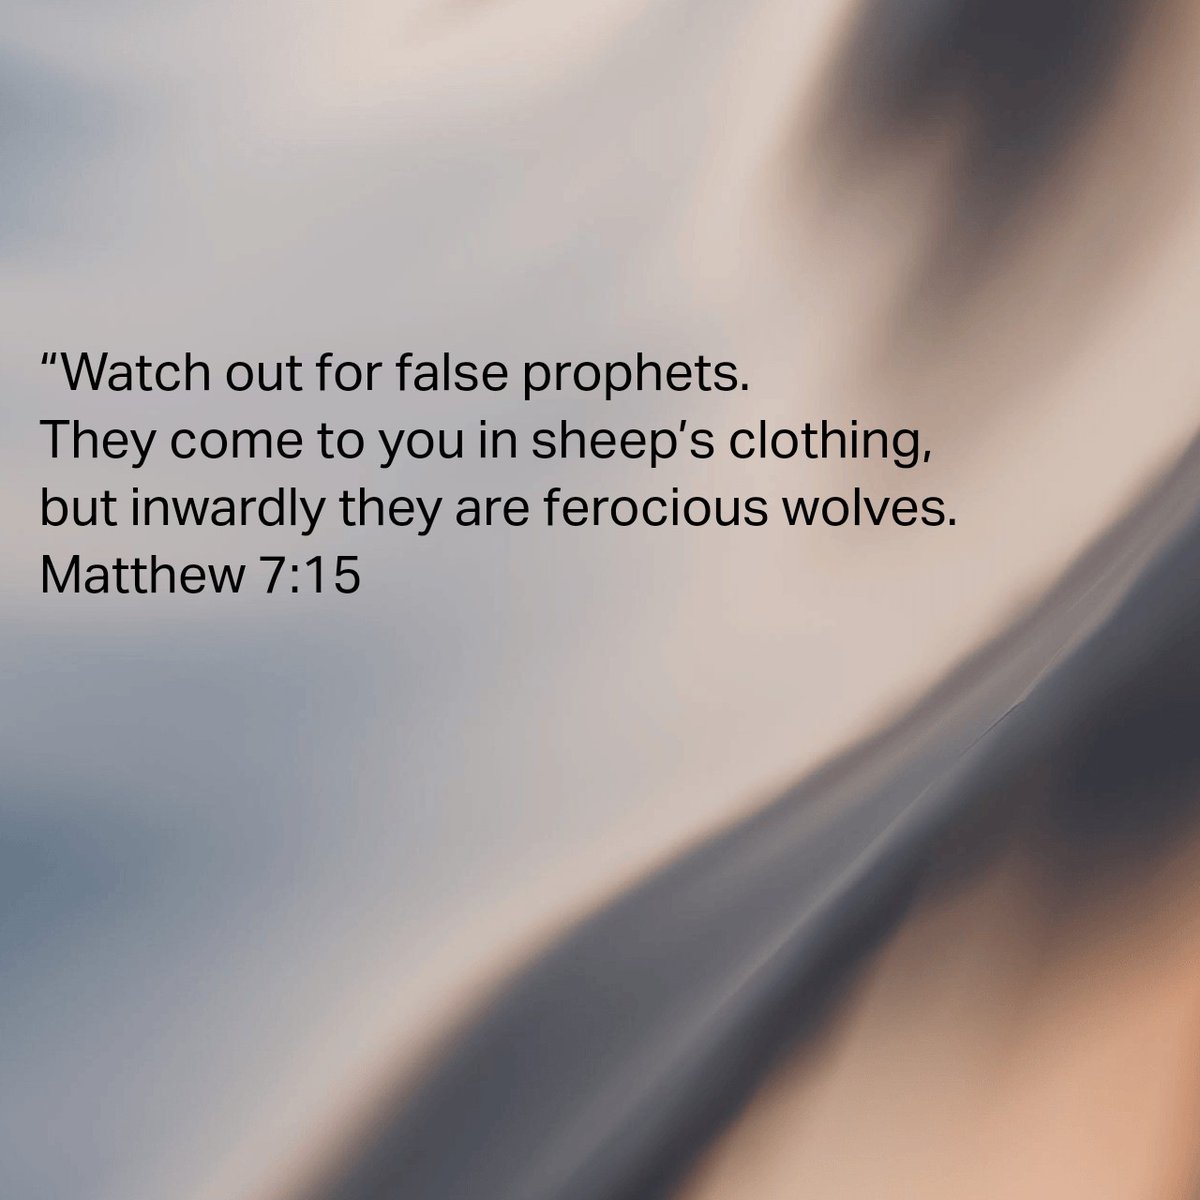 Why was JP Miller obsessed with parodies? Beware of false prophets, wolves in sheep's clothing. Matthew 7: 15 #justiceformica